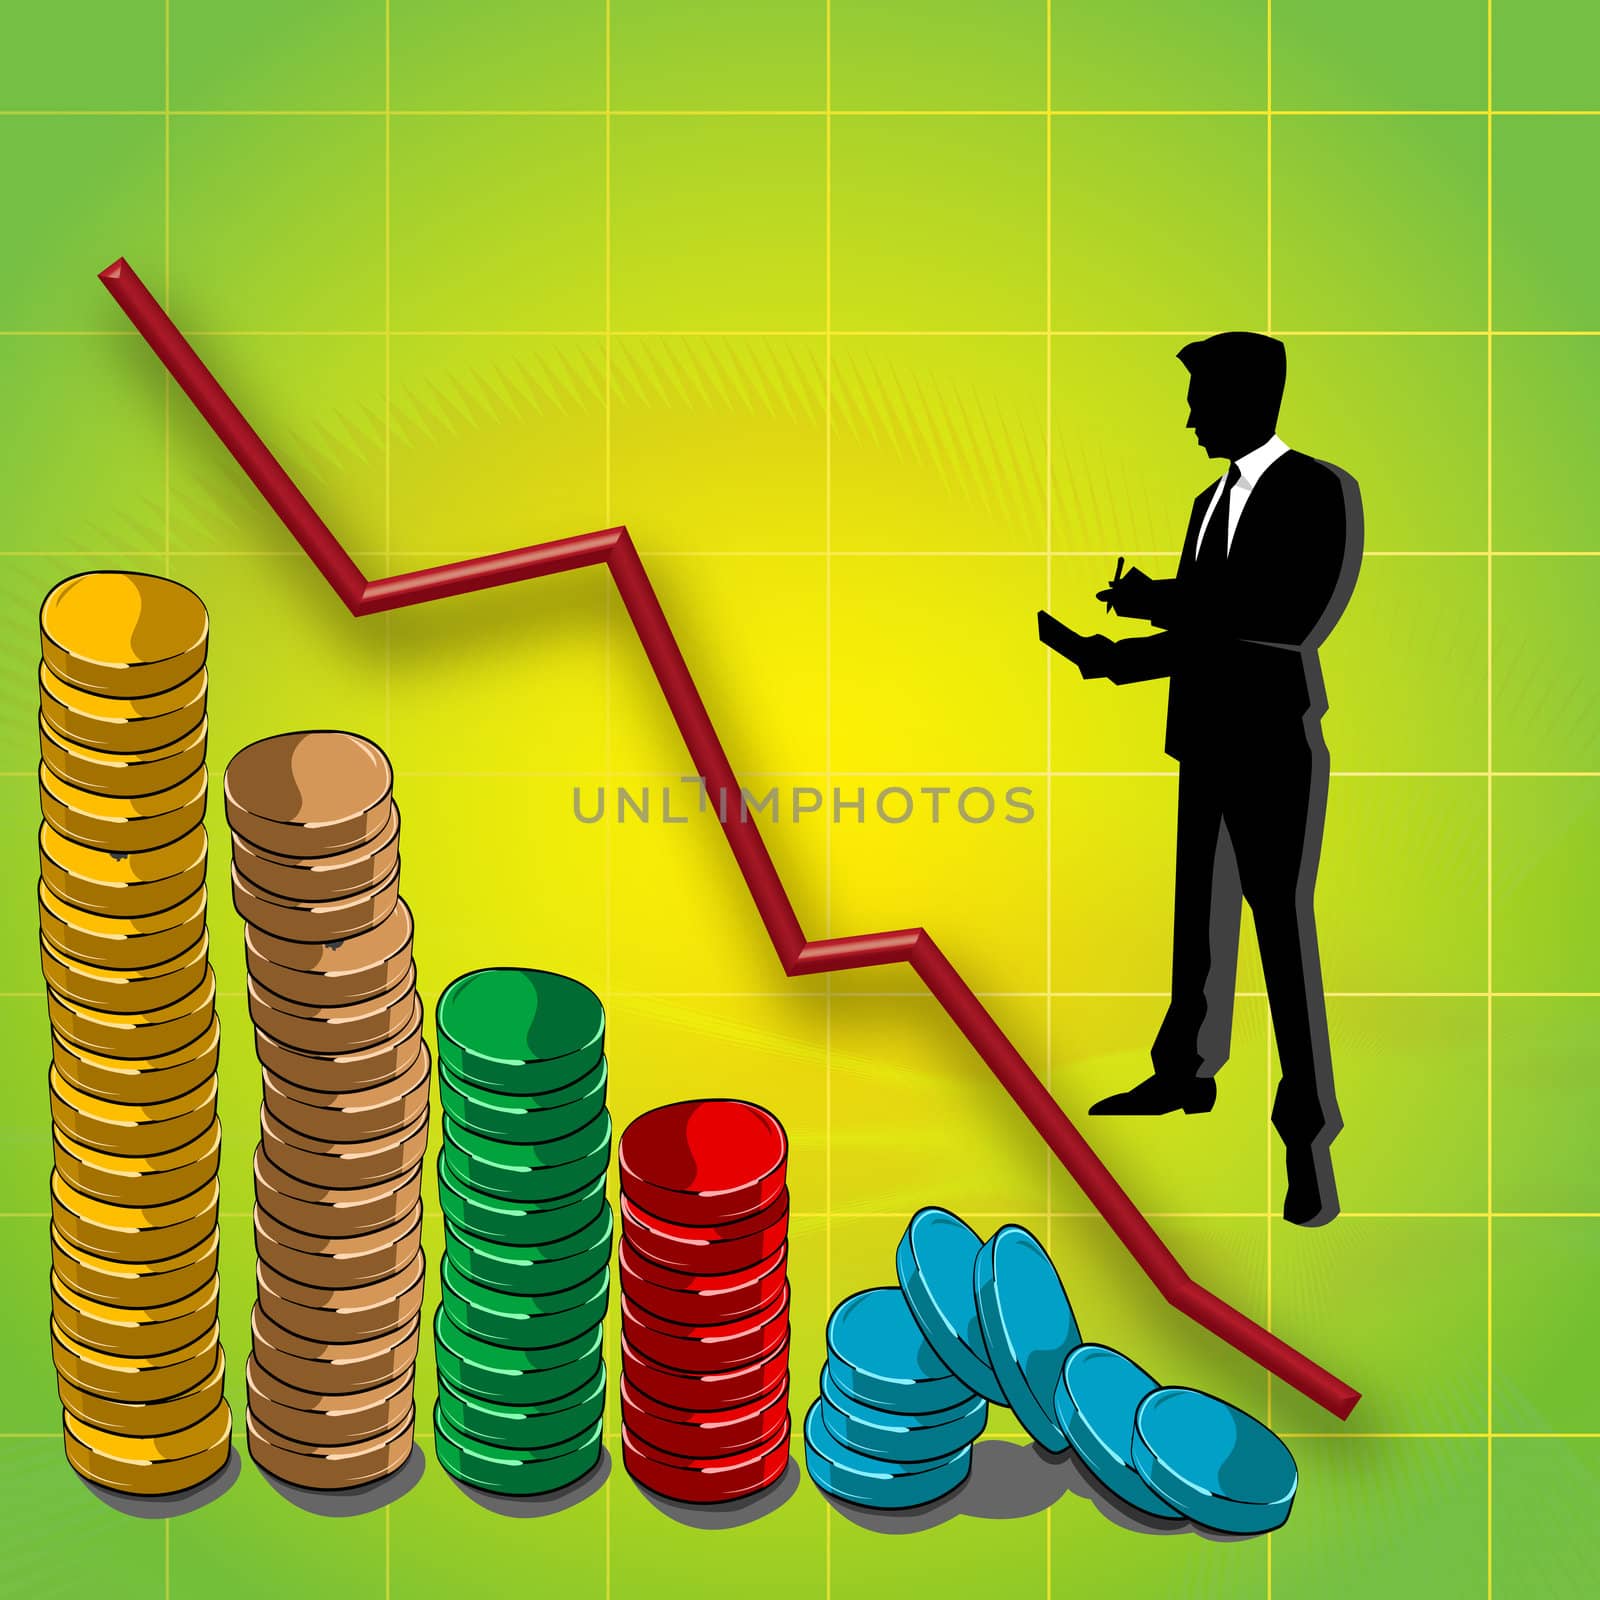 graphline and bar graph of coins, business man silhouette  by abhishek4383